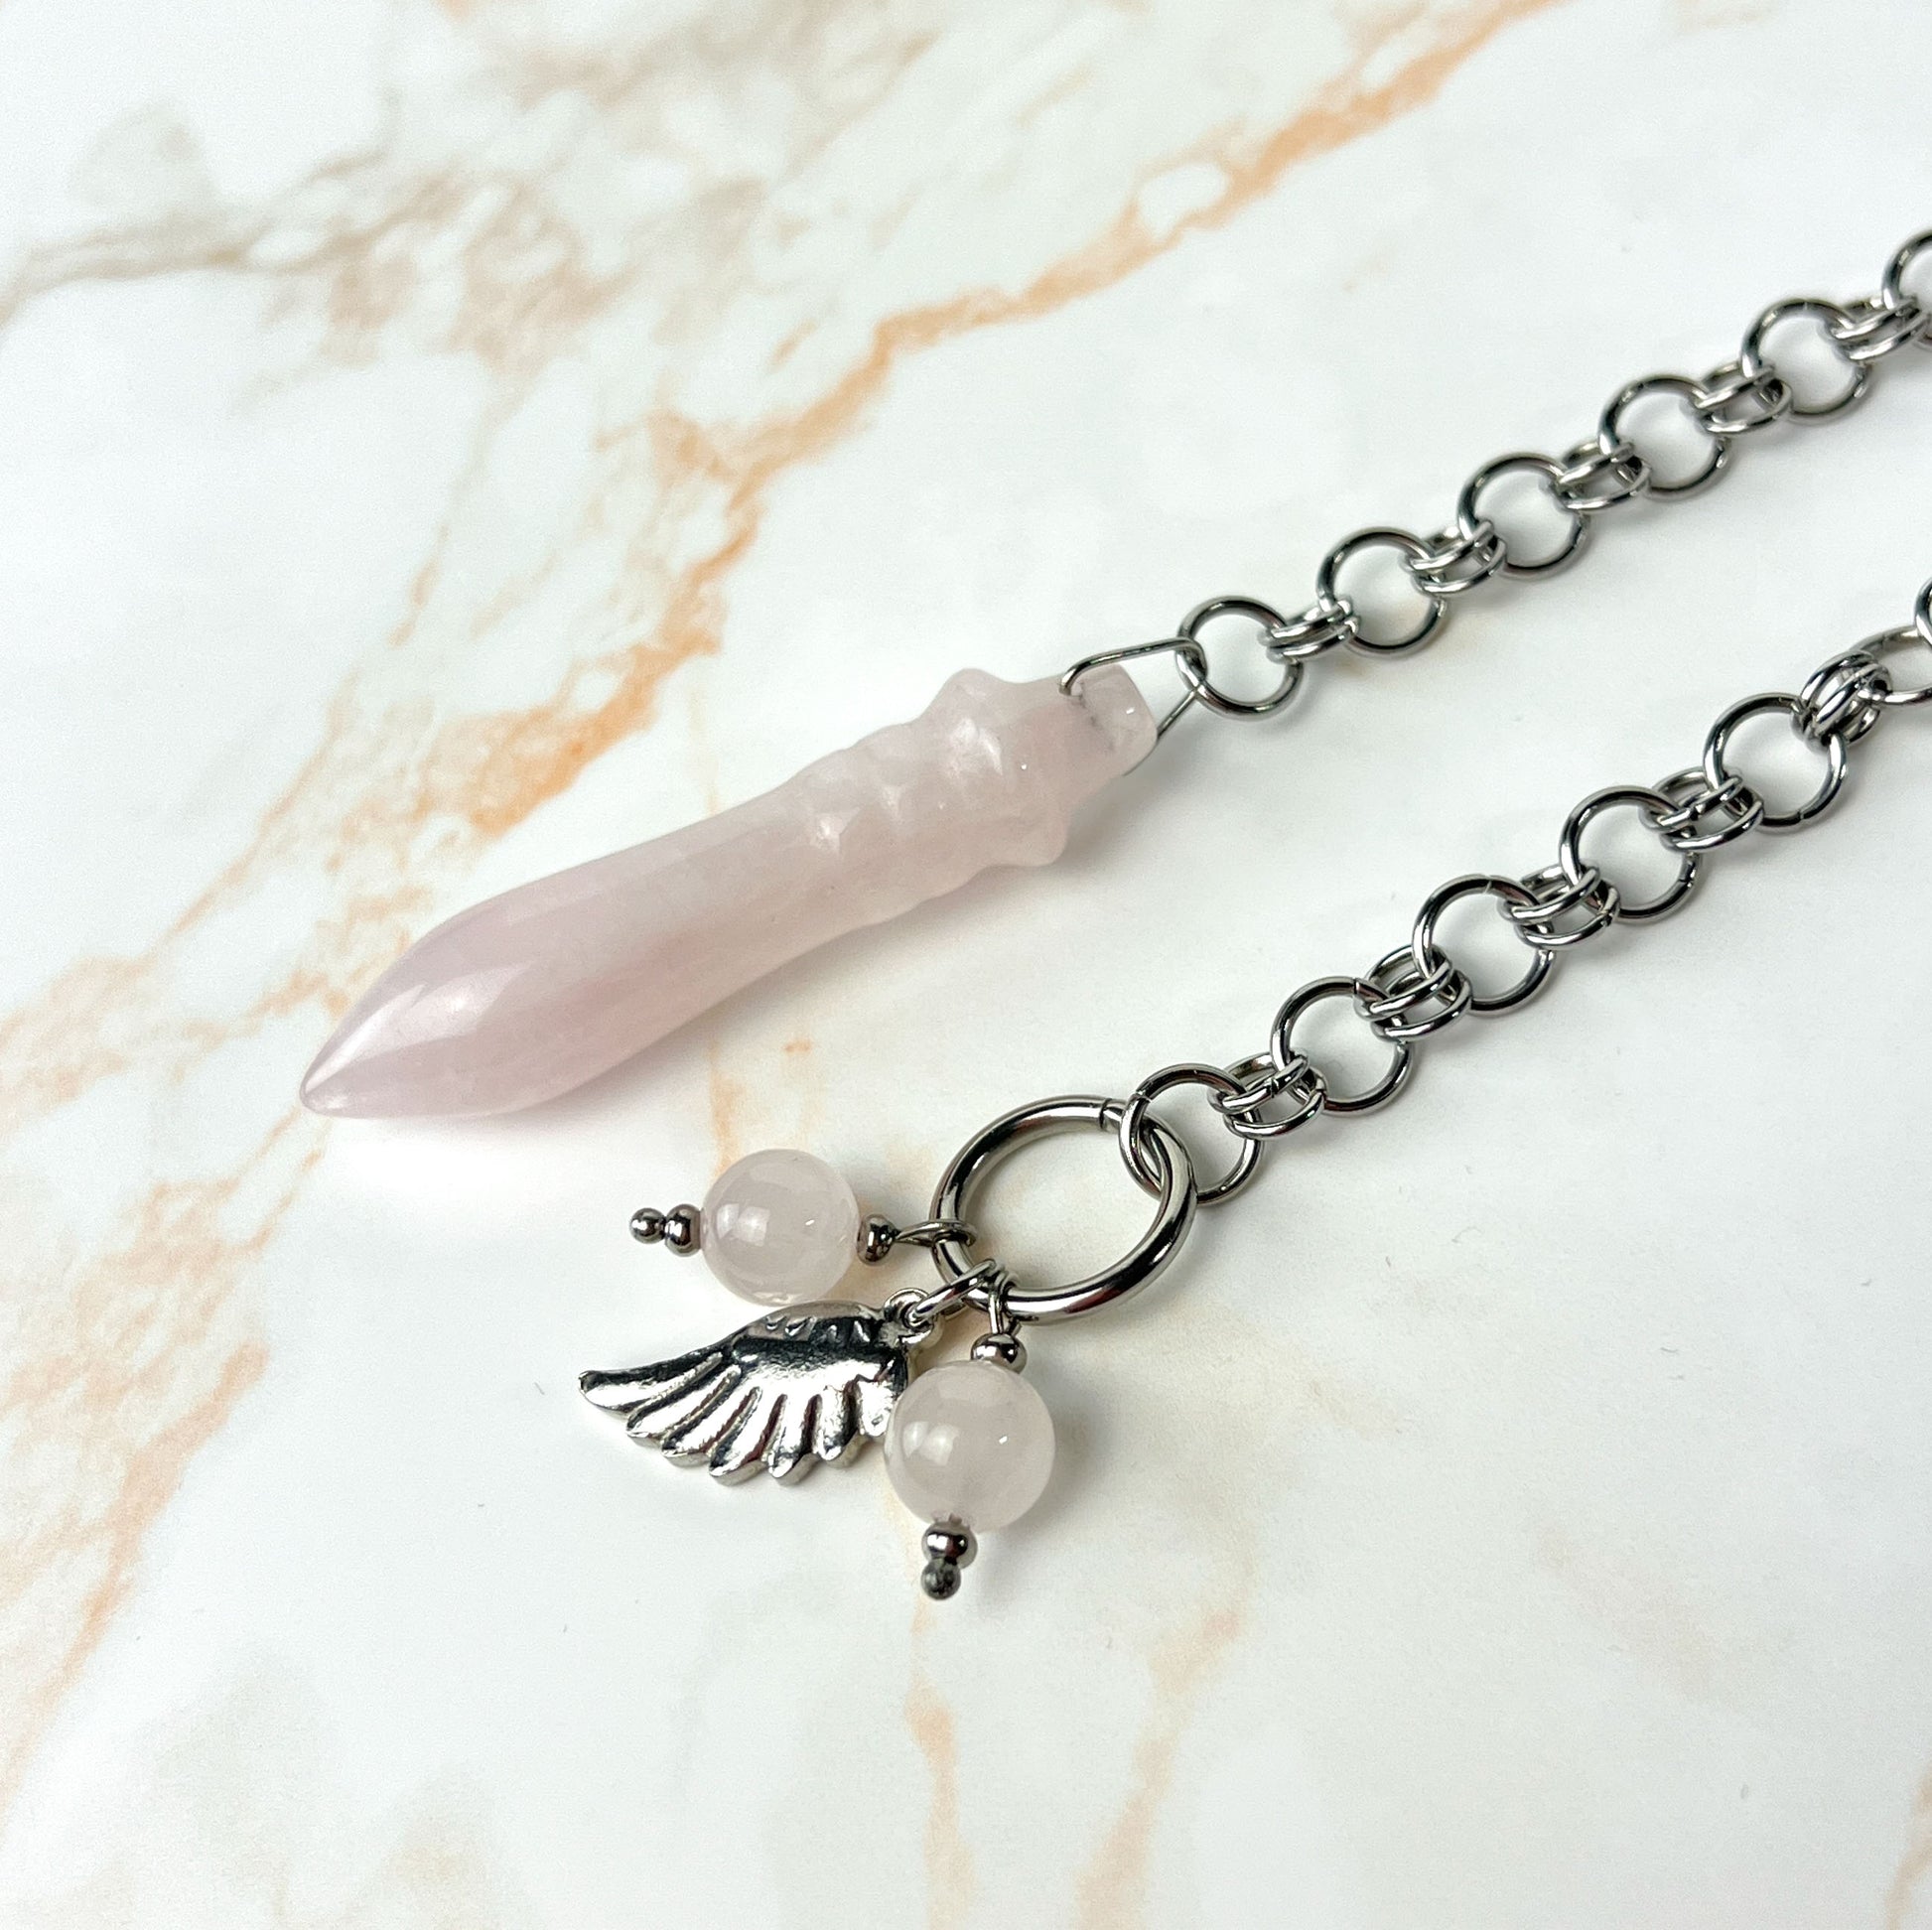 Egyptian Thot pendulum rose quartz chainmail, wing and stainless steel Baguette Magick